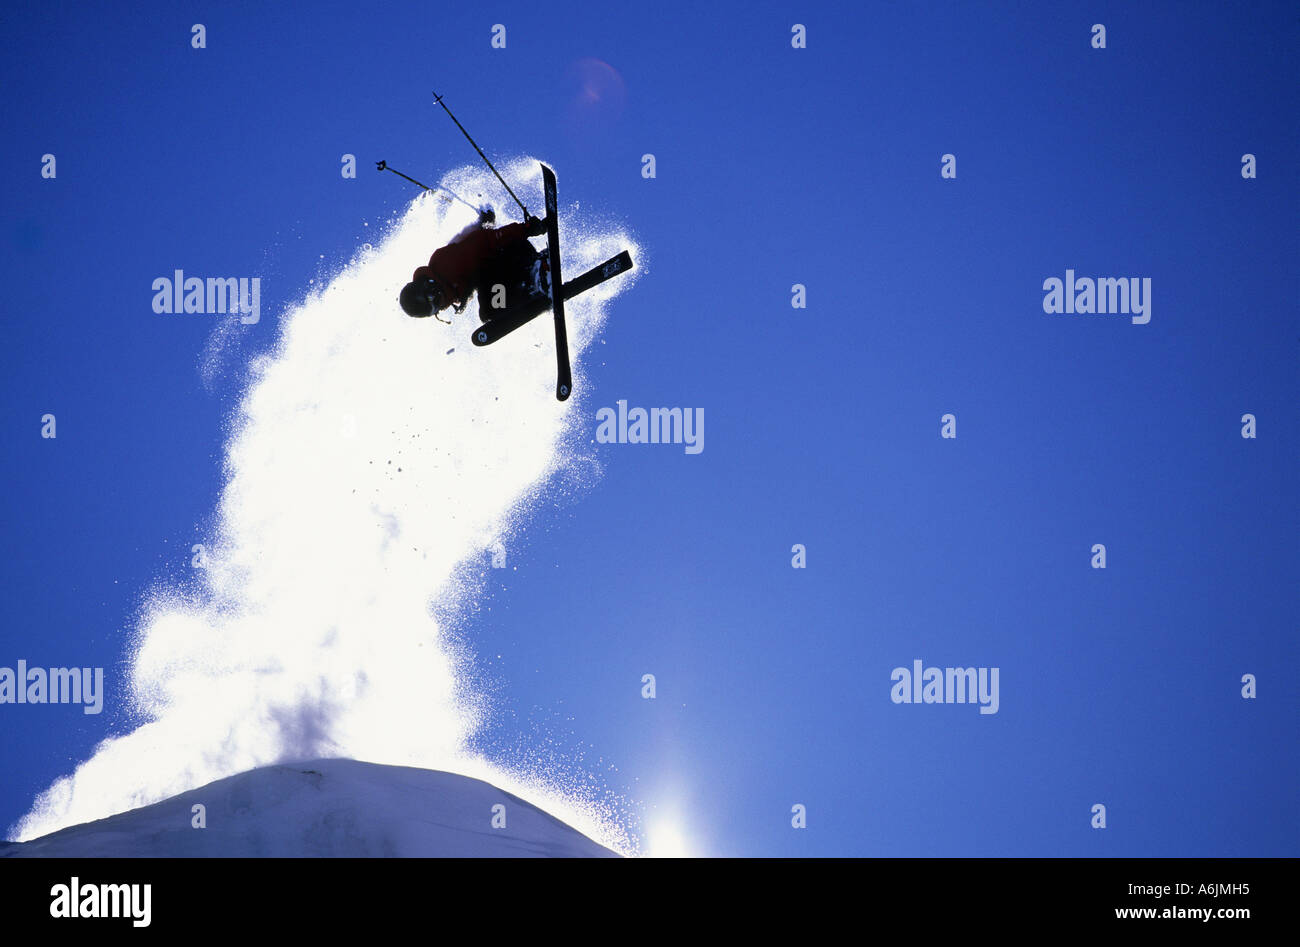 Freeride skier with a plume of snow at  Haines Alaska USA Stock Photo